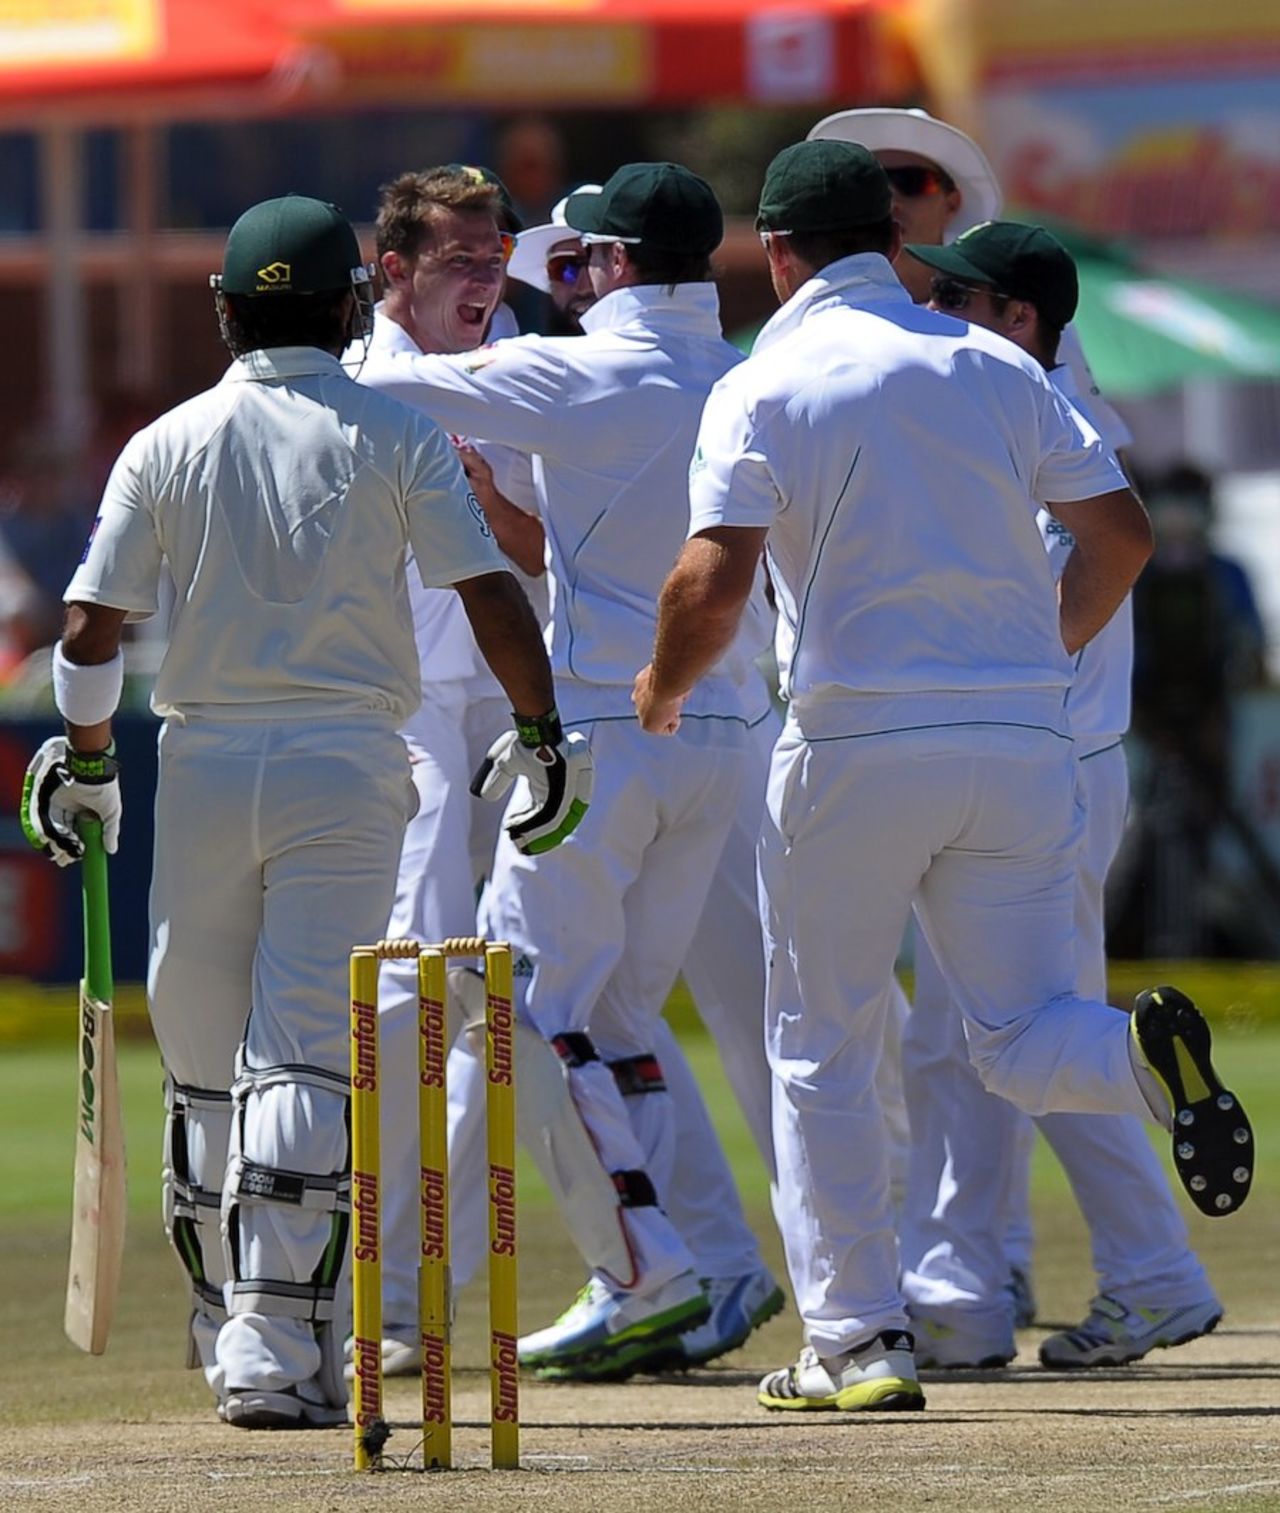 Dale Steyn had Mohammad Hafeez lbw for a duck, South Africa v Pakistan, 2nd Test, Cape Town, 3rd day, February 16, 2013